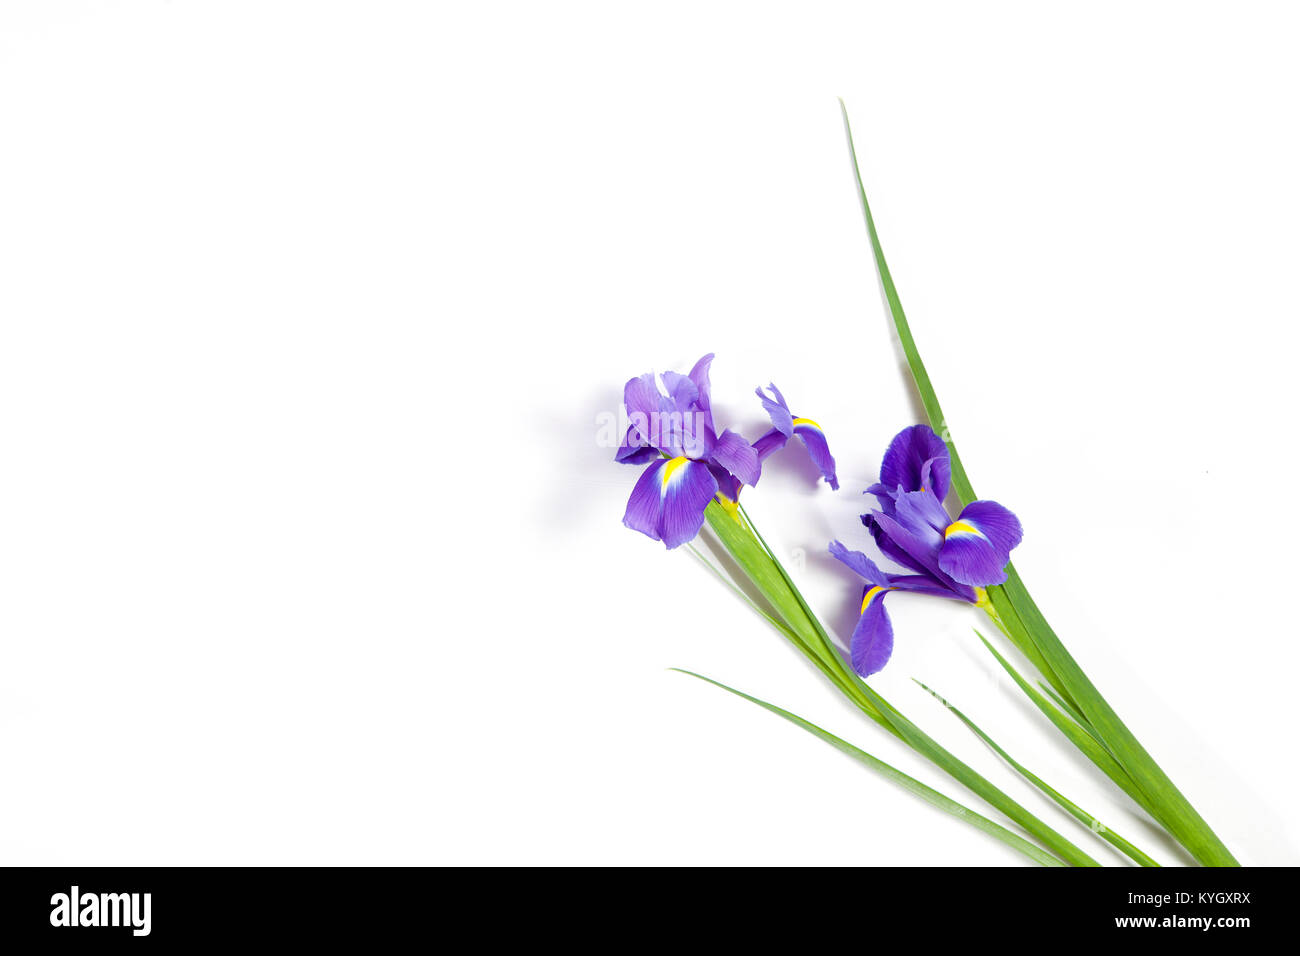 Violet Irises xiphium (Bulbous iris, sibirica) on white background with space for text. Top view, flat lay. Holiday greeting card for Valentine's Day, Stock Photo